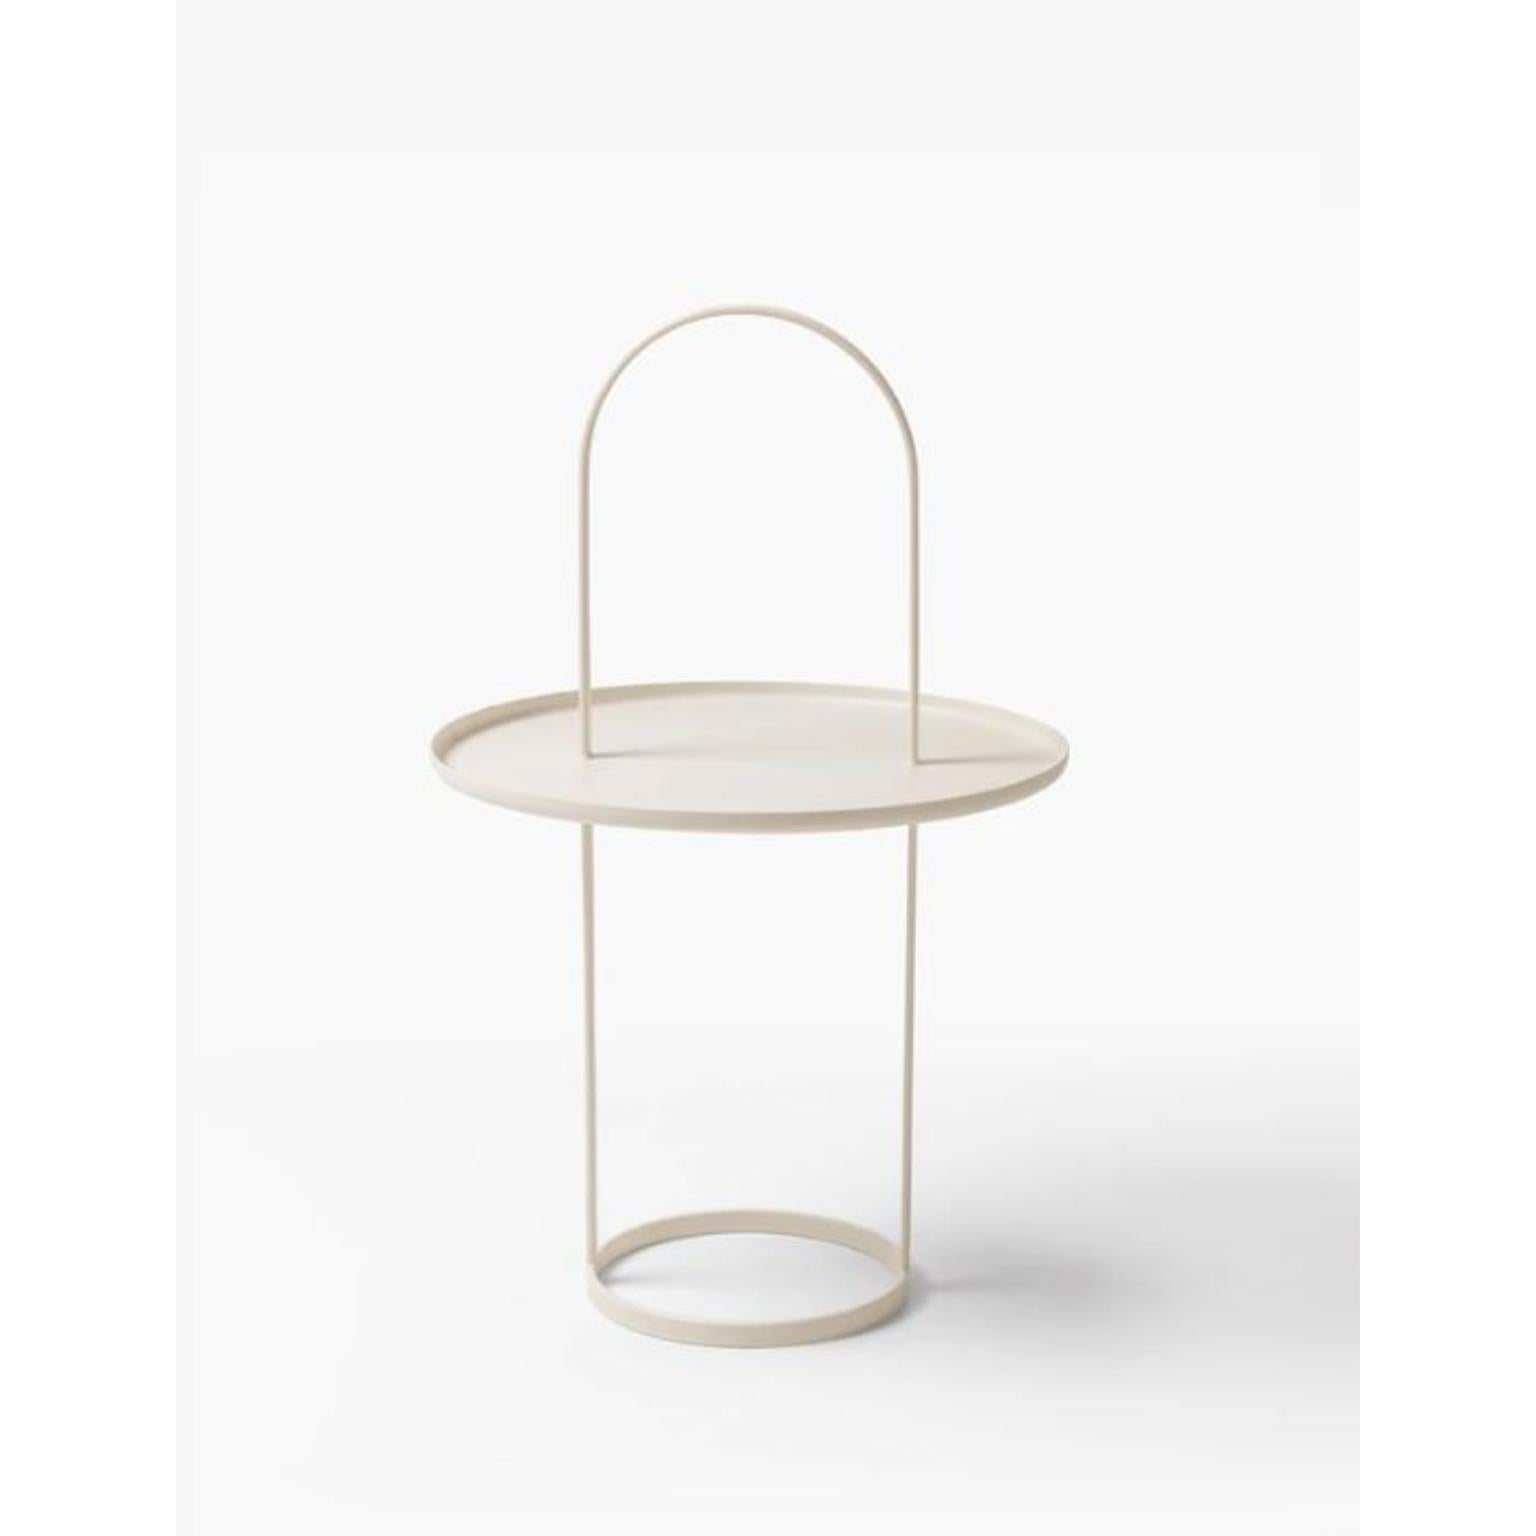 Alca 2 Side Table by Wentz
Dimensions: D 45 x W 45 x H 71 cm
Materials: Steel.
Also available in different colors (Black, White, Sand).


WENTZ
SILENT AND NATURAL LIVING DESIGNED IN BRAZIL
Brazilian brand of furniture, lighting and accessories